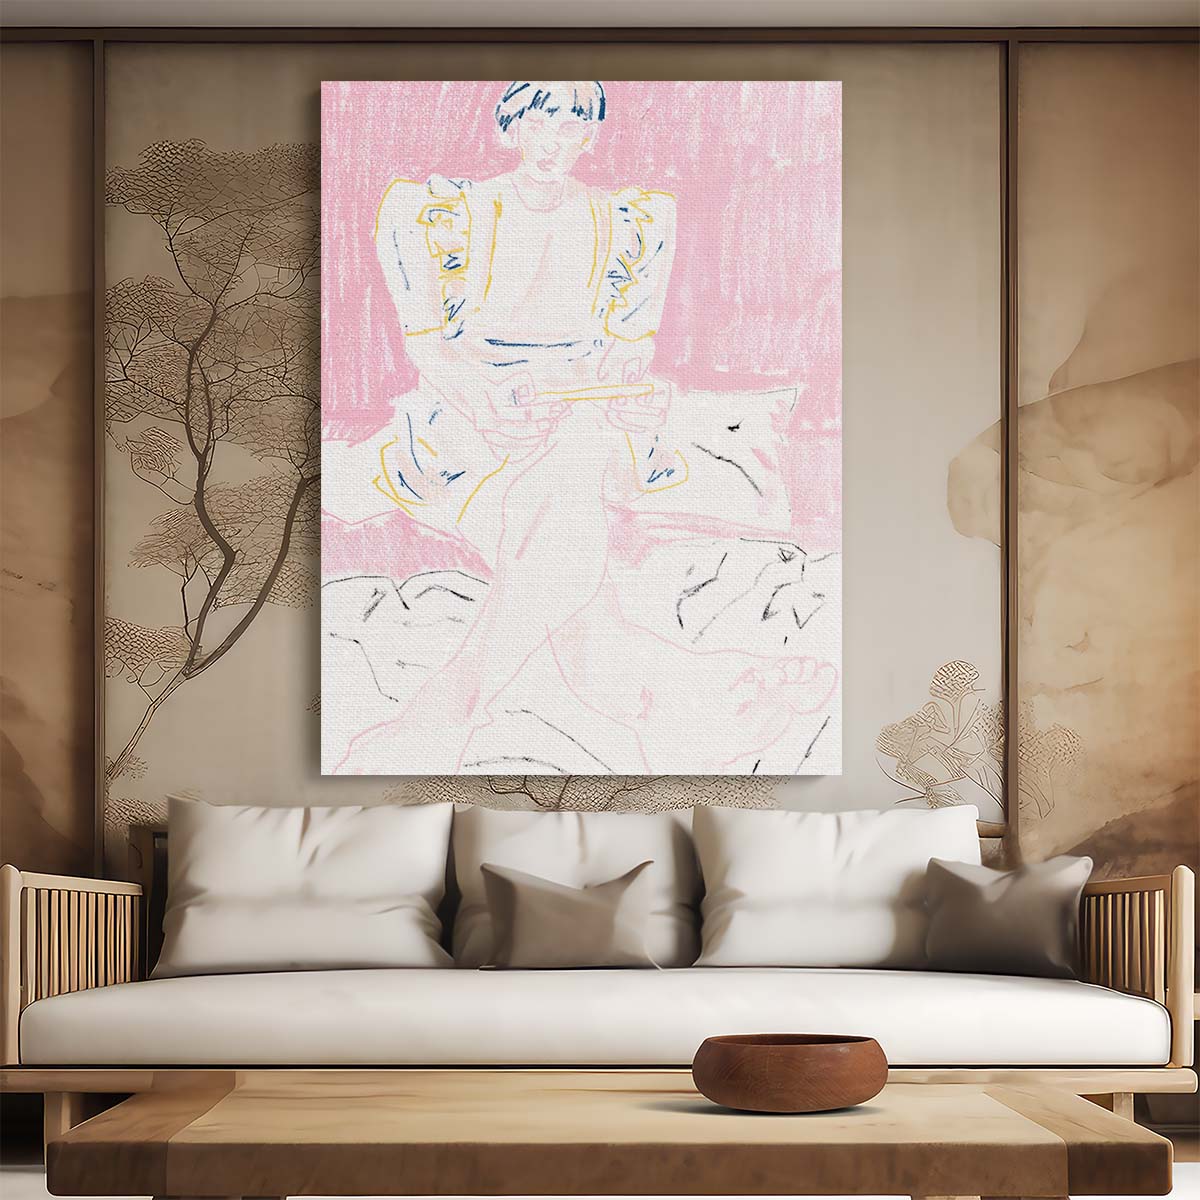 Pink Pastel Gamer Girl Portrait, Figurative Illustration by Francesco Gulina by Luxuriance Designs, made in USA